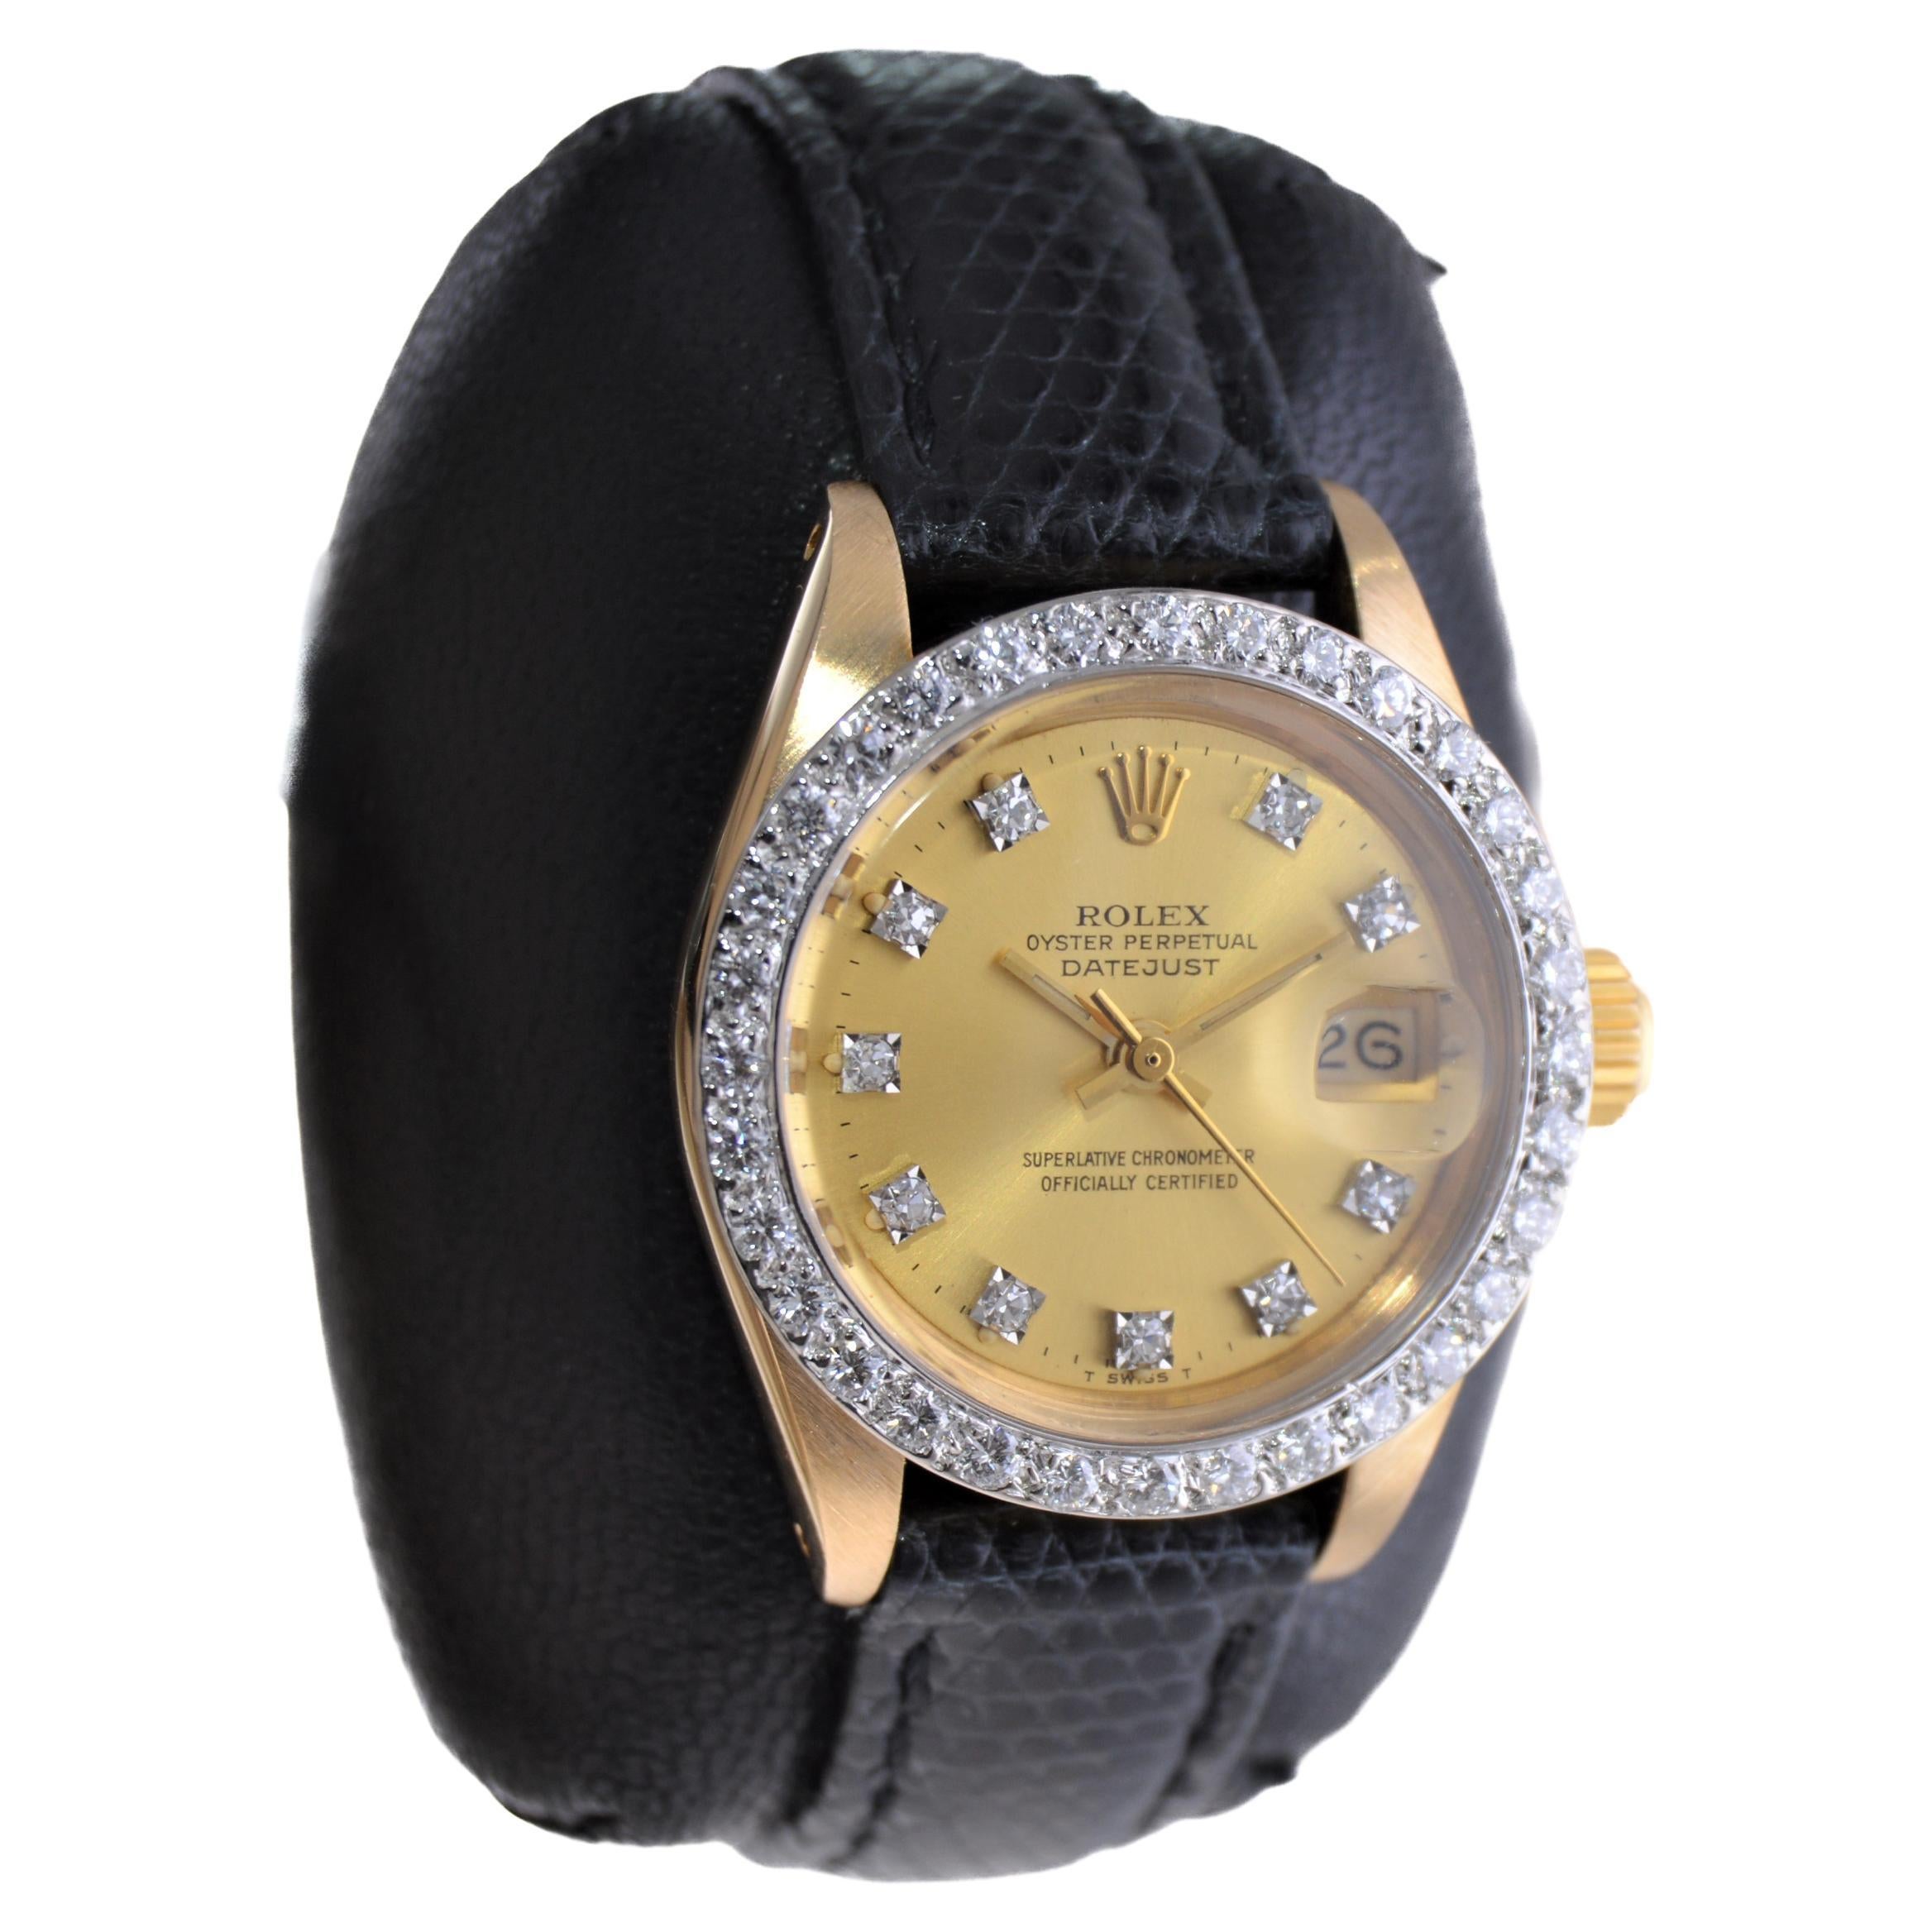 FACTORY / HOUSE: Rolex Watch Company
STYLE / REFERENCE: Datejust / Reference 6900
METAL / MATERIAL: 18Kt. Yellow Gold 
CIRCA / YEAR: 1970's
DIMENSIONS / SIZE: Length 32mm X Diameter 26mm
MOVEMENT / CALIBER: Perpetual Winding / 28 Jewels / Caliber